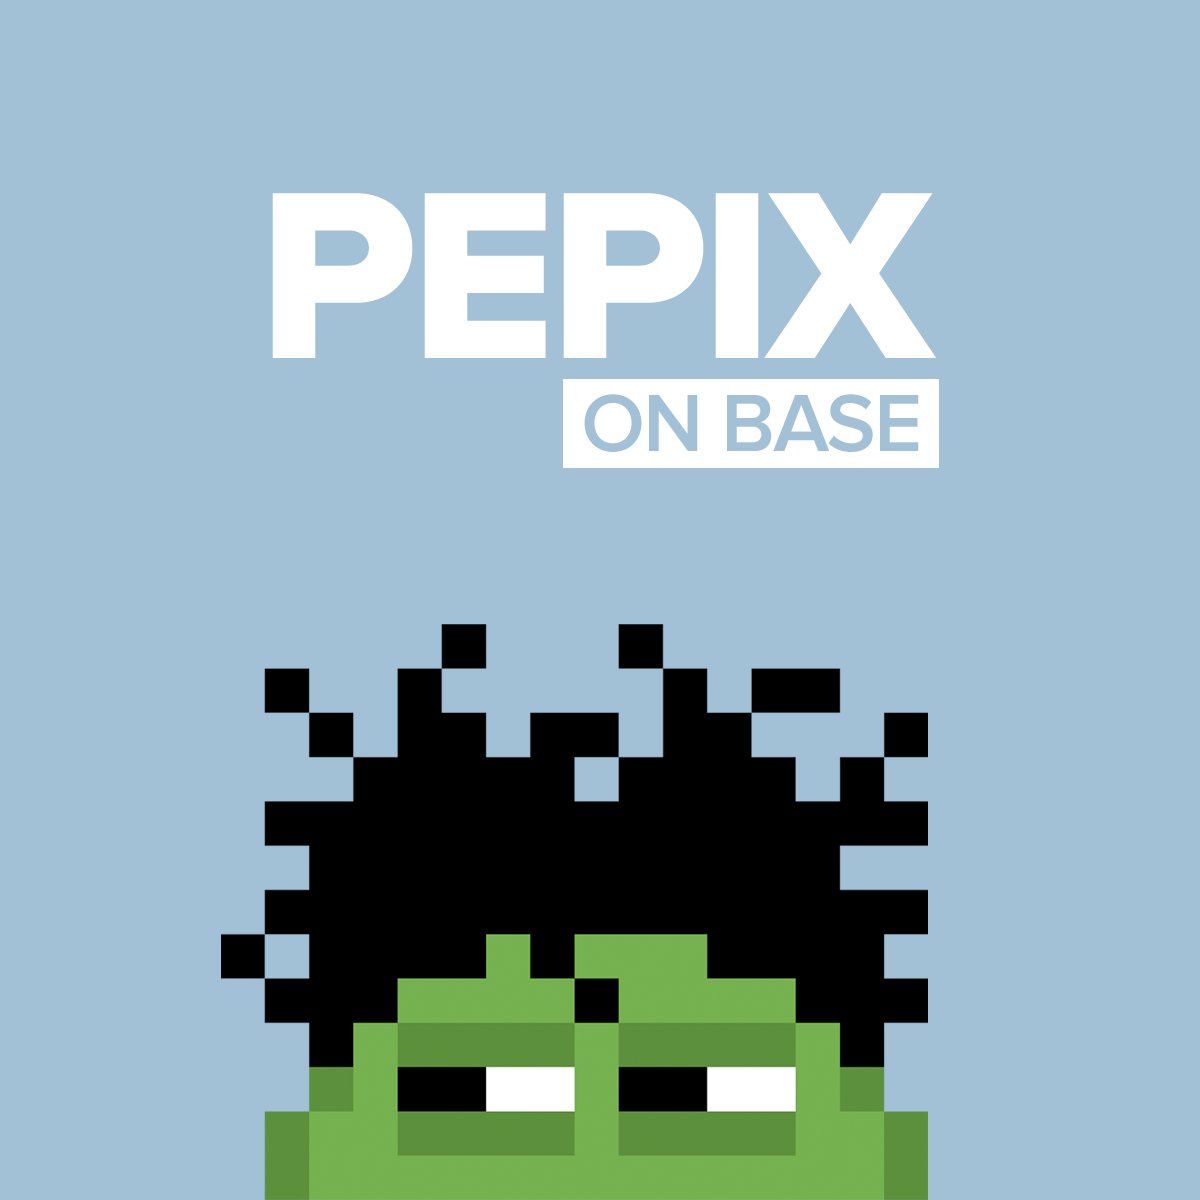 Head over to @PEPIXonBASE for more info and shenanigans. More details about the mint will be revealed later today, including WL access, etc. See you there 🐸